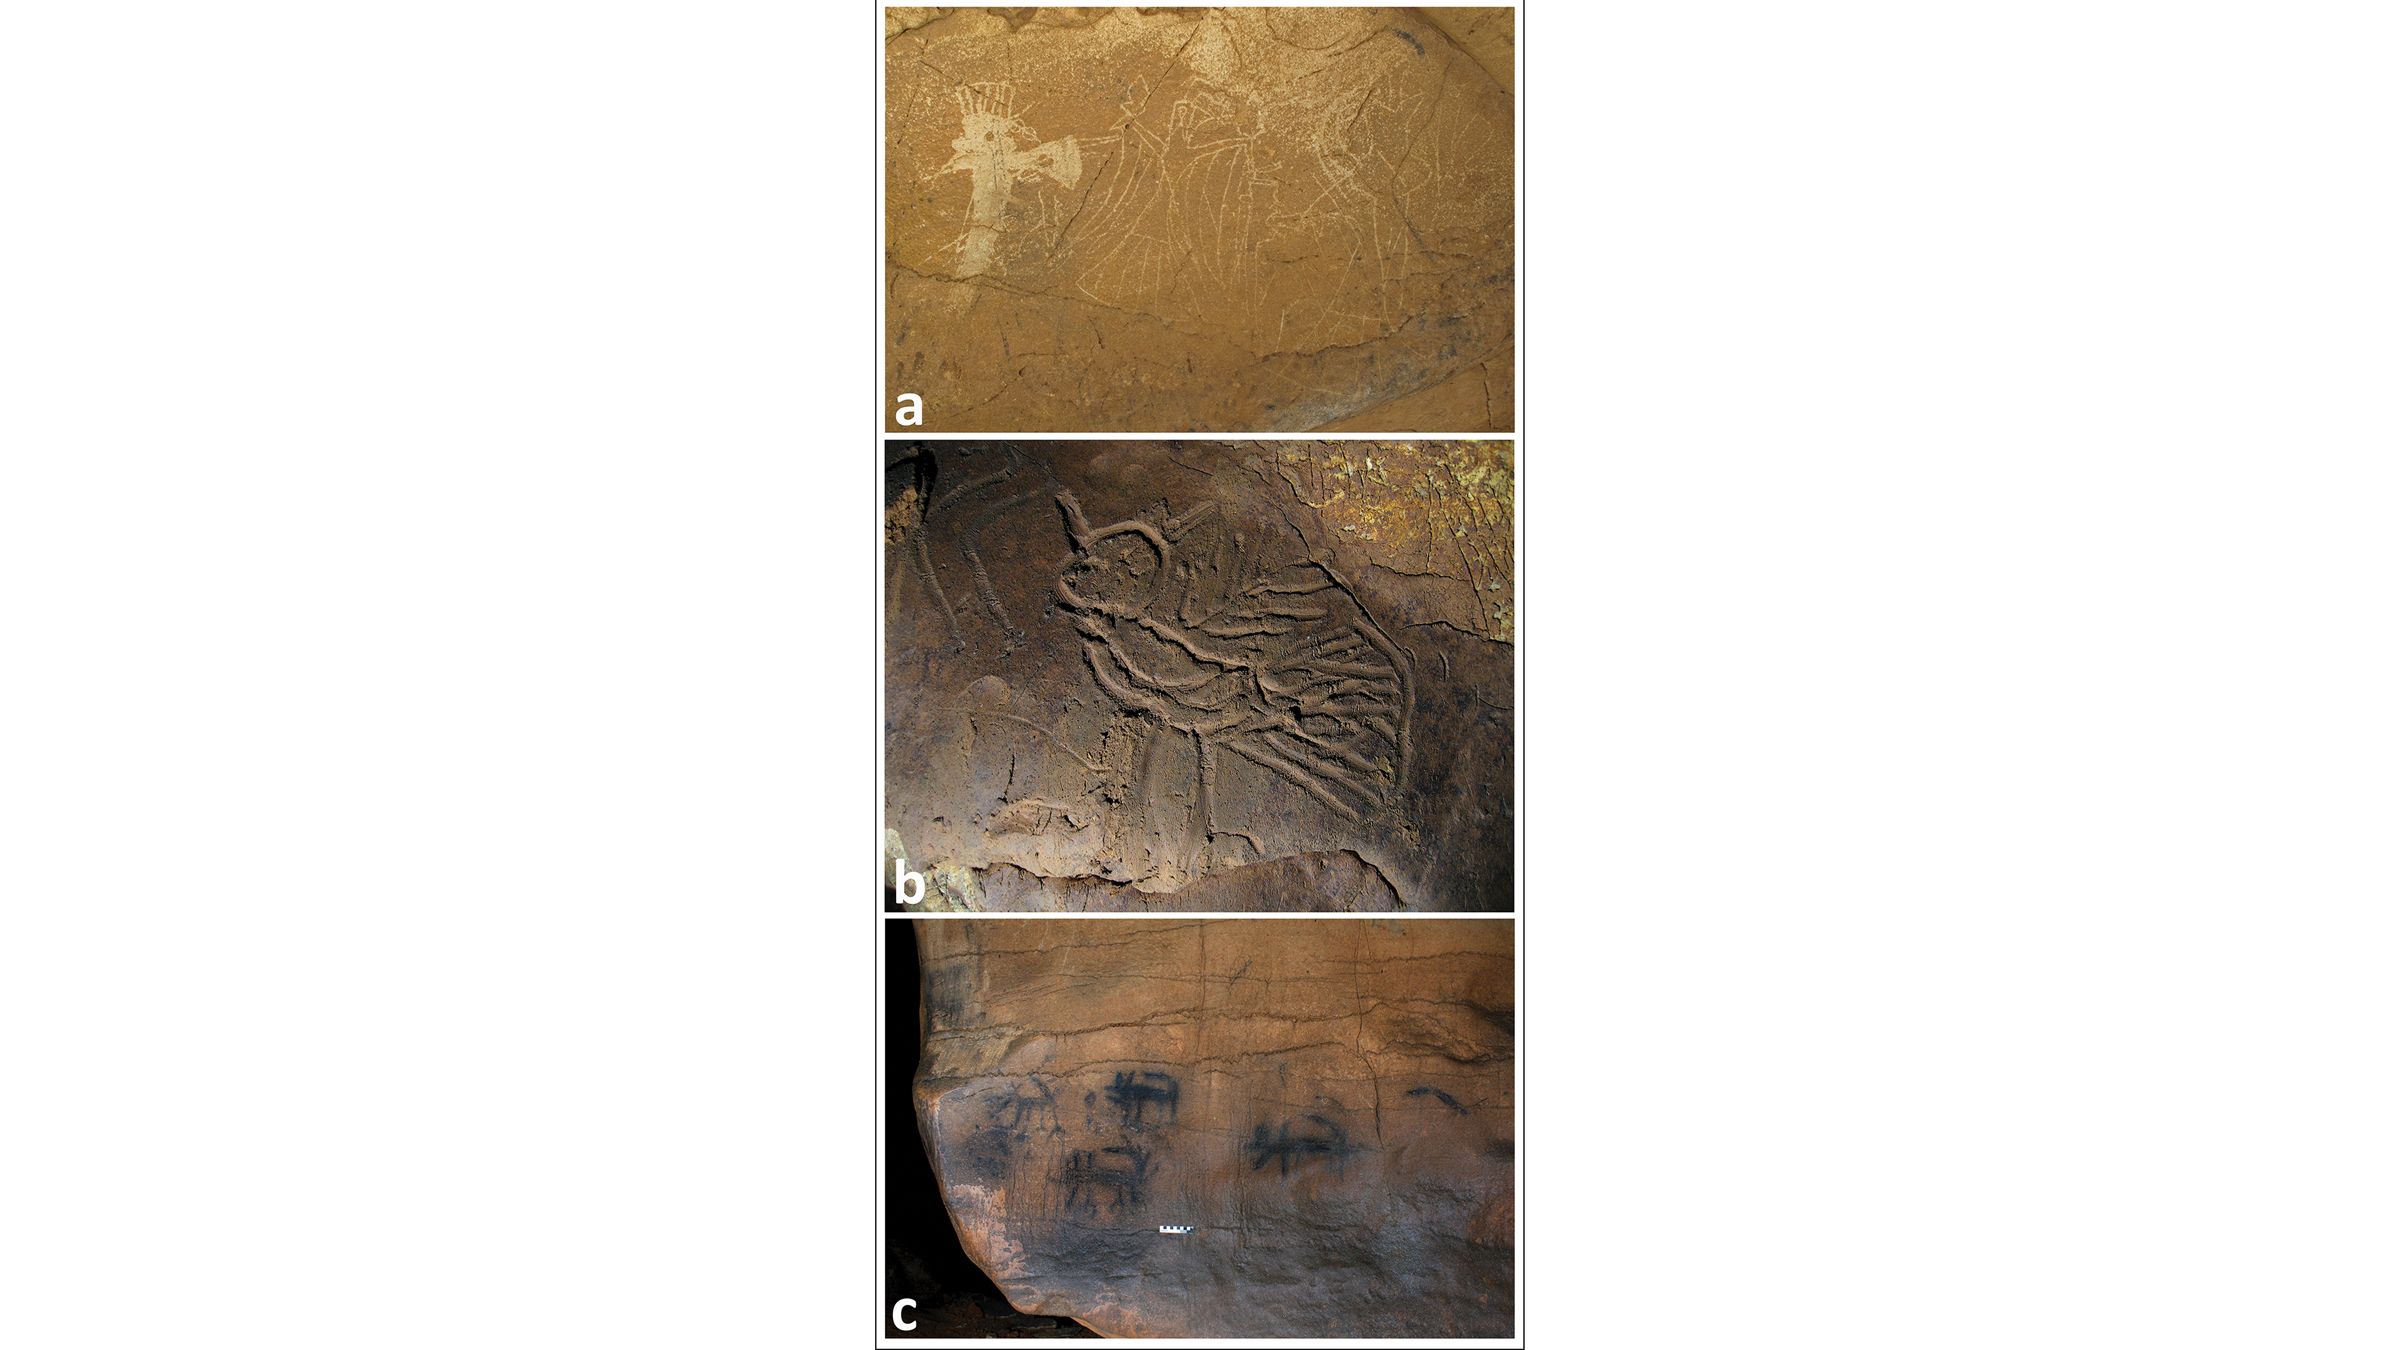 Photographs of (A) petroglyphs of birds and weapons from the 11th unnamed cave, (B) a mud glyph owl from Mud Glyph Cave, and (C) pictographs of canids from the 48th unnamed cave in Tennessee.